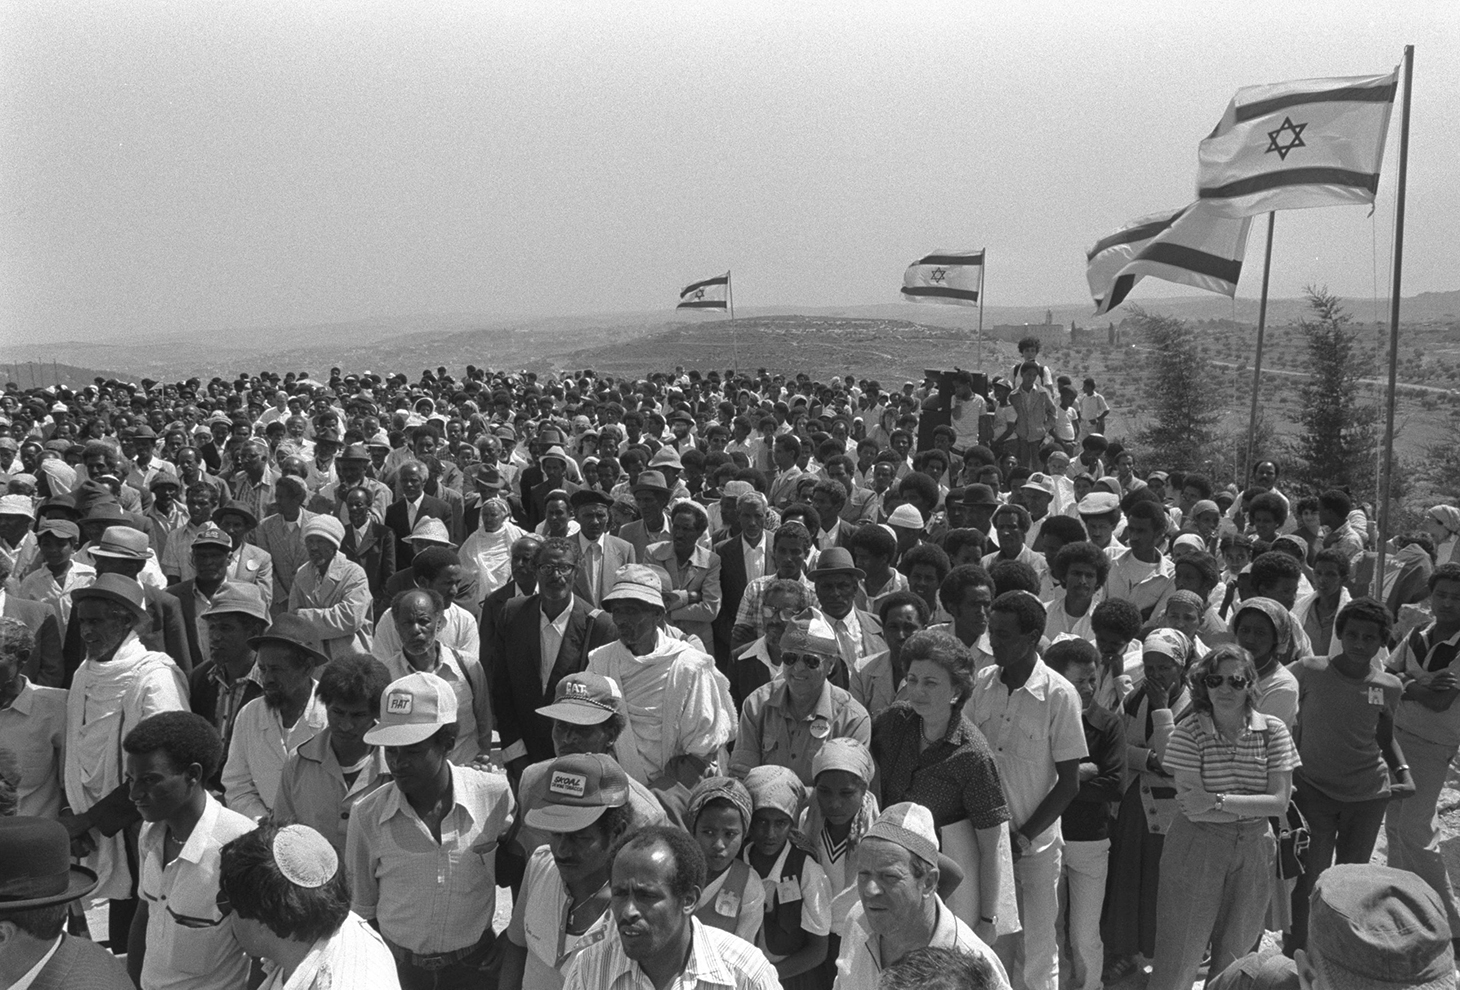 MEMBERS OF COMMUNITY OF ETHIOPIAN JEWS IN ISRAEL NEAR KIBBUTZ RAMAT RAHEL FOR TREE-PLANTING CEREMONY TO COMEMORATE BROTHERS WHO DIED ON JOURNEY TO THE PROMISED LAND. Photo: Nati Hernik, GPO